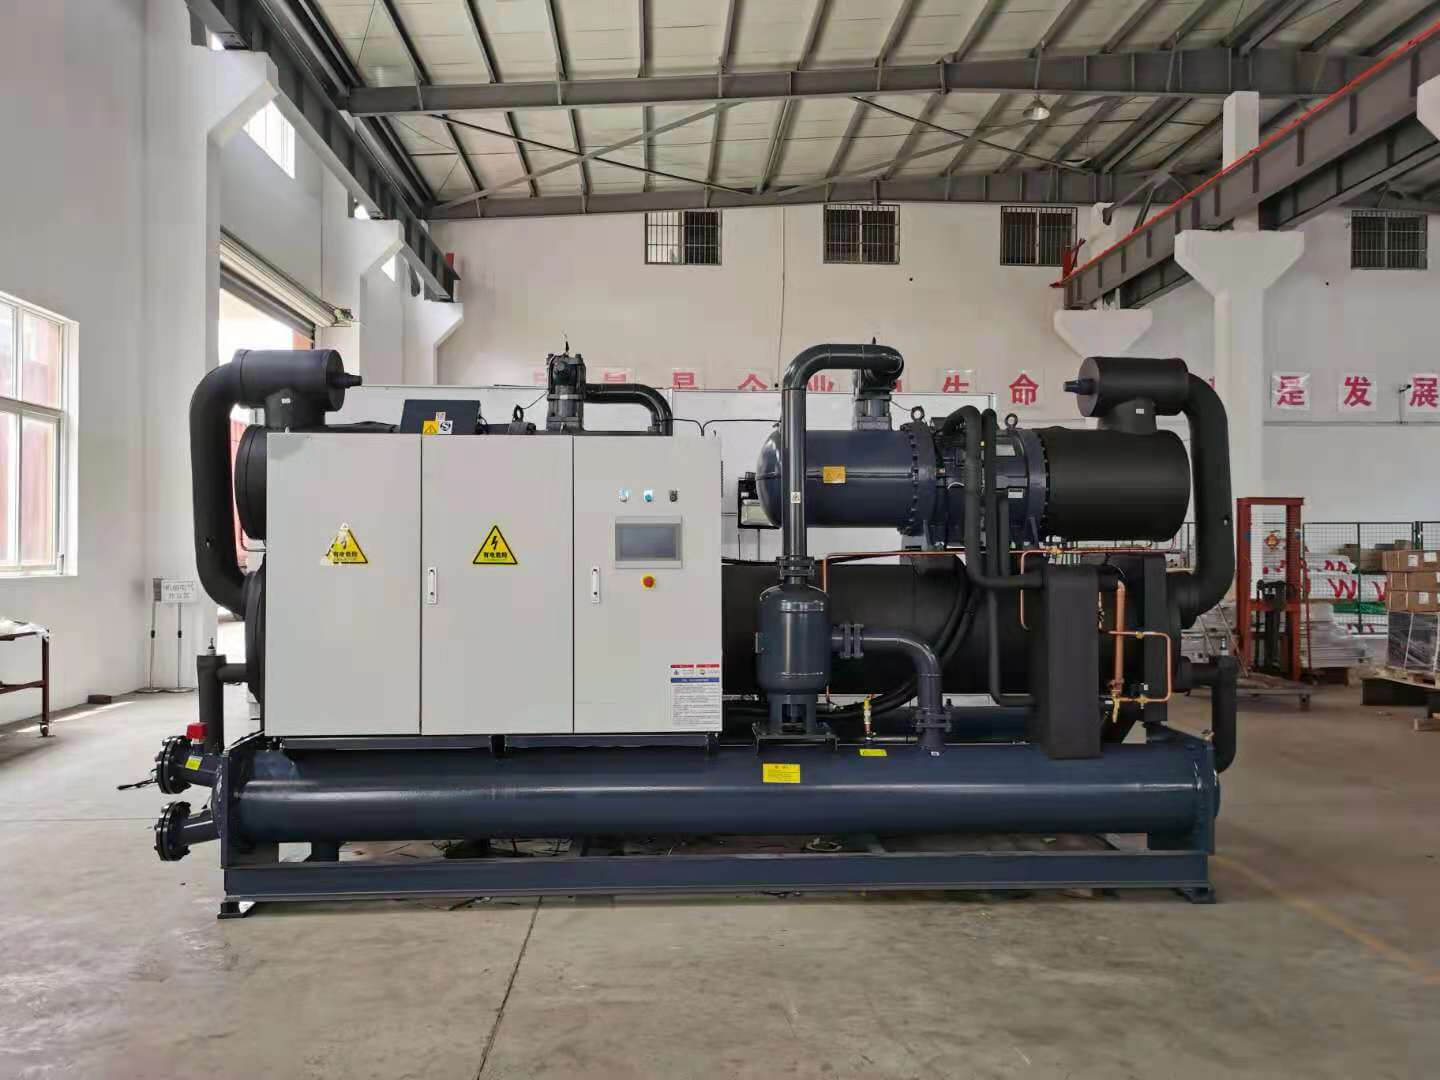 The Withair® chiller addresses four primary requirements—efficiency, application flexibility, sustainability, and confidence.